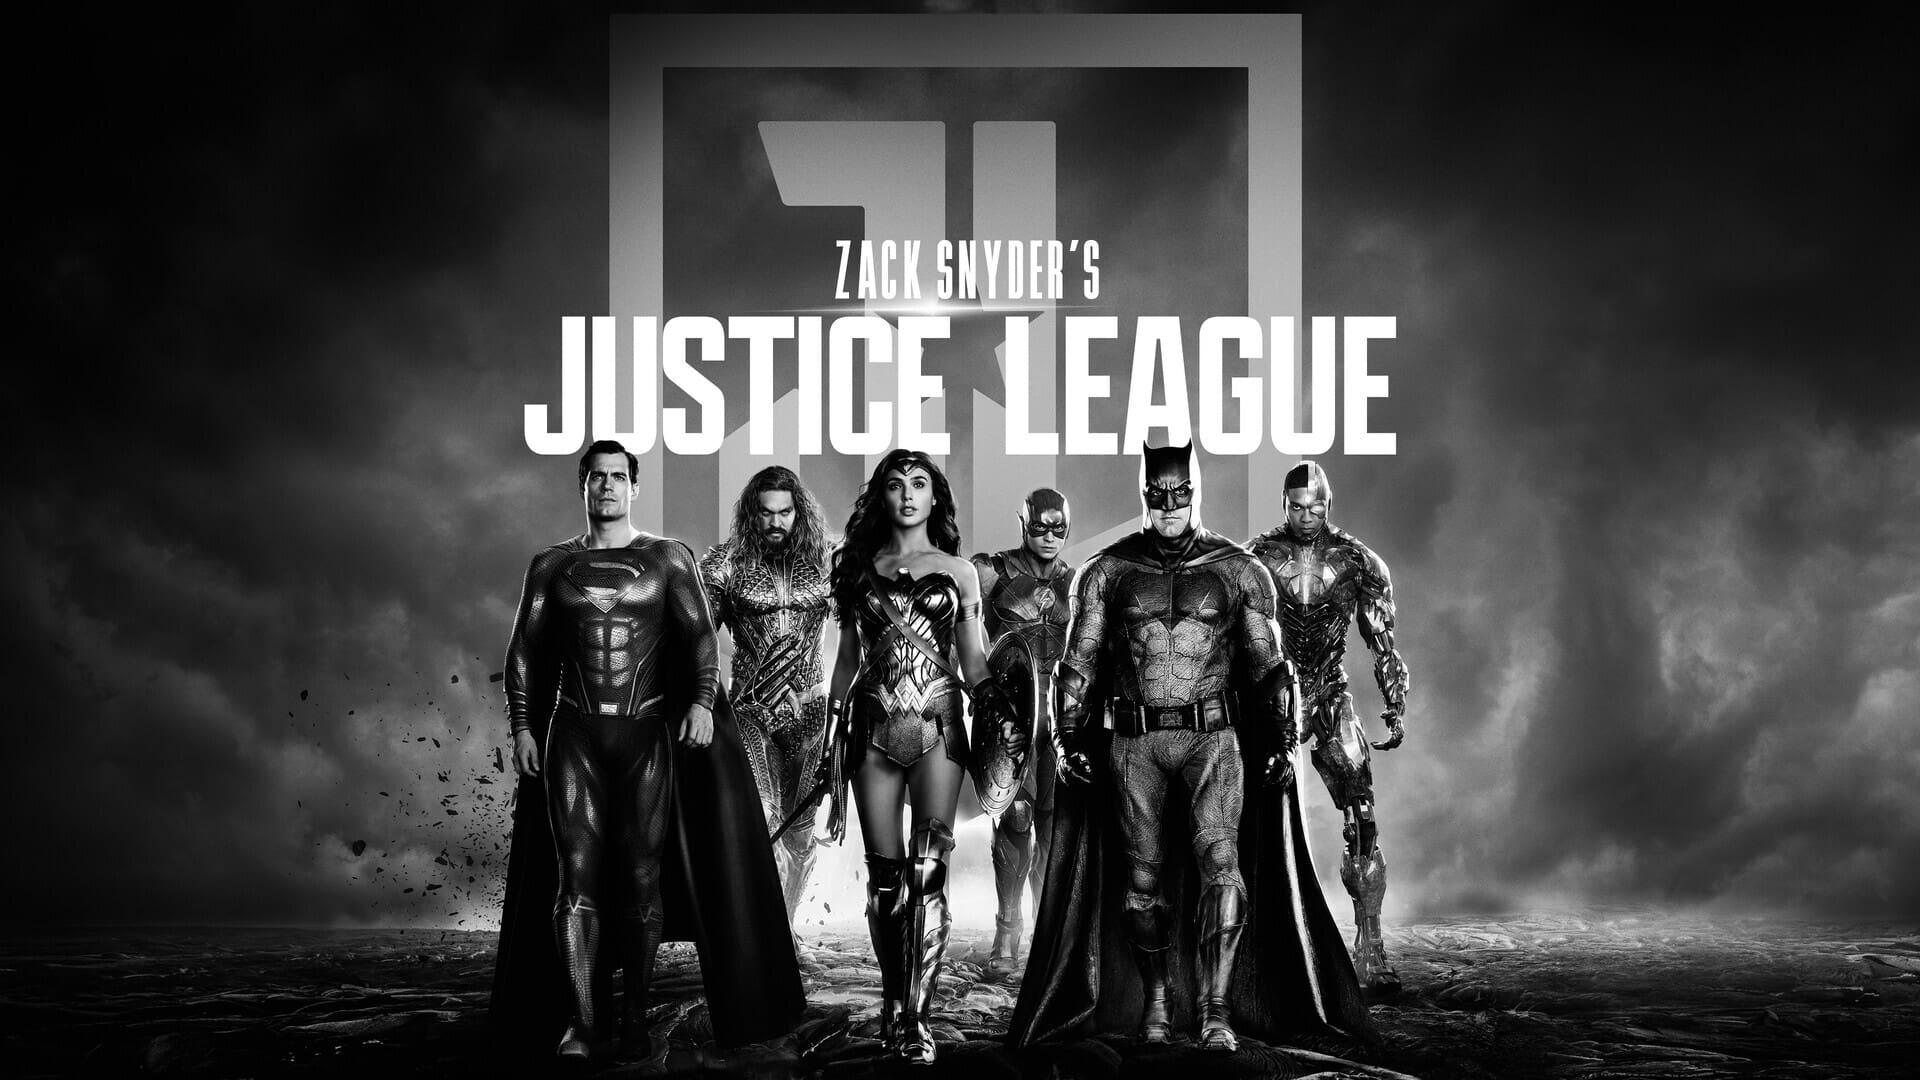 Zack Snyder's Justice League Wallpapers (37+ images inside)